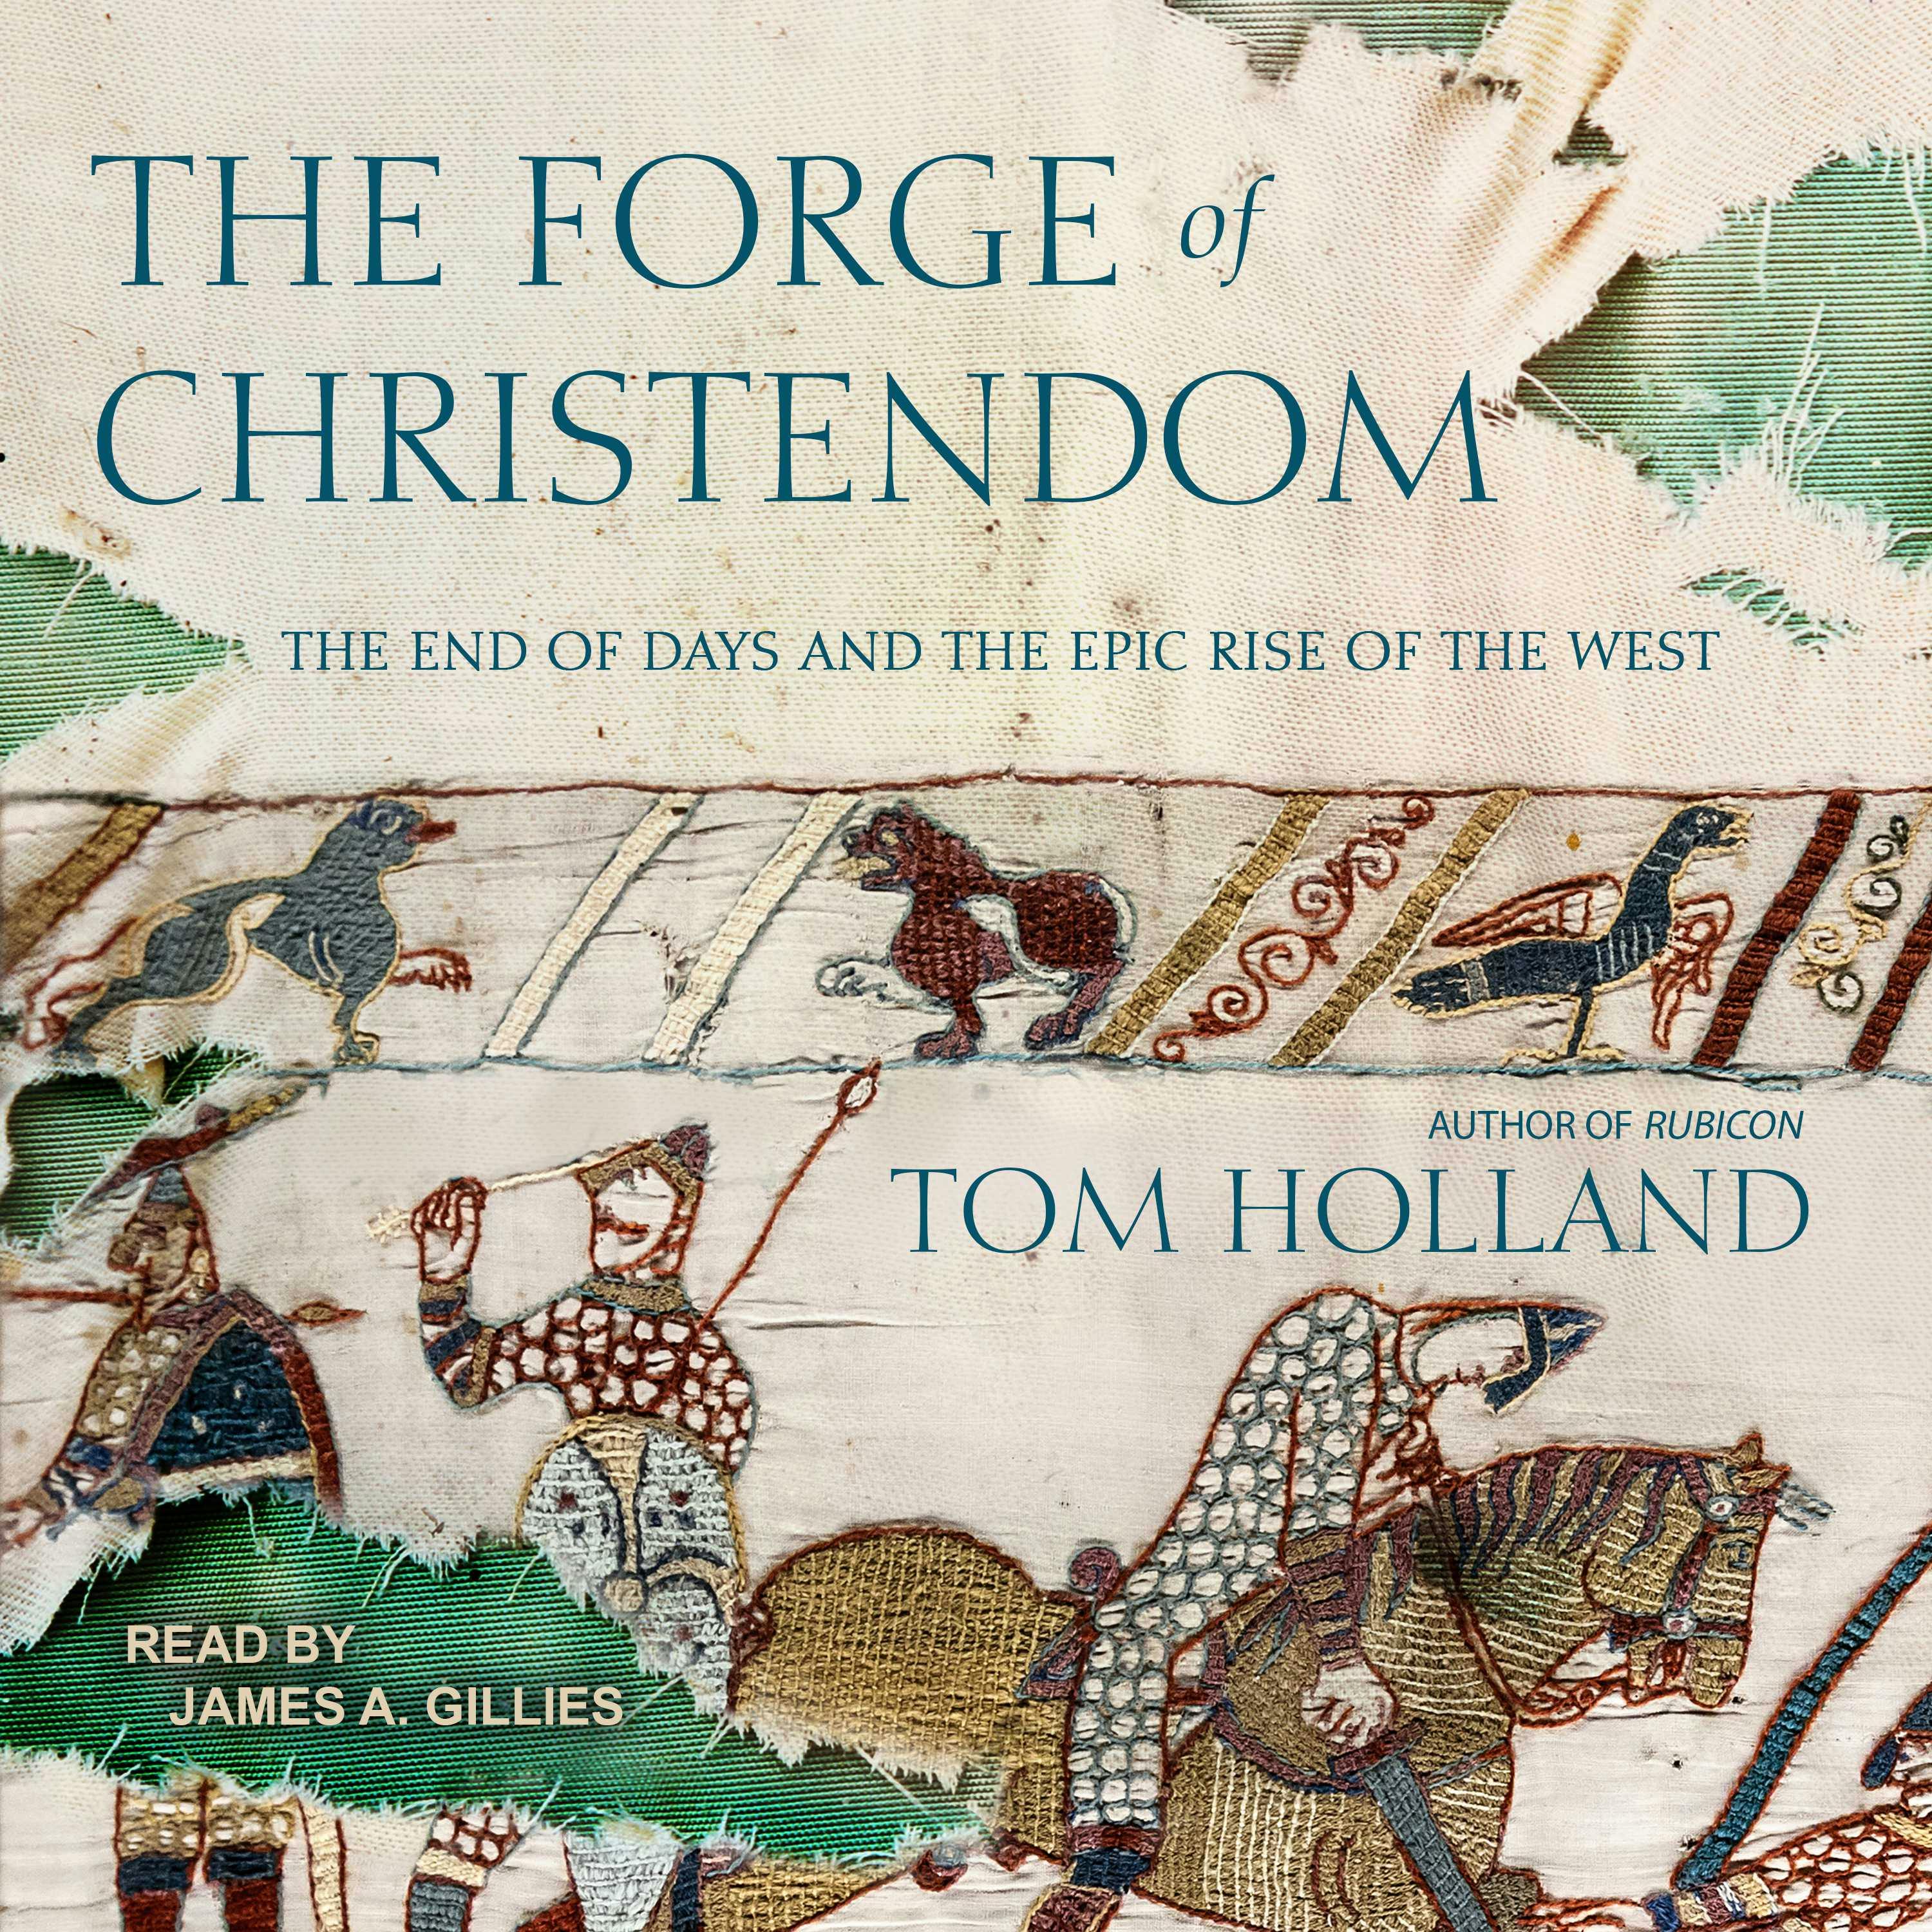 The Forge of Christendom: The End of Days and the Epic Rise of the West - Tom Holland